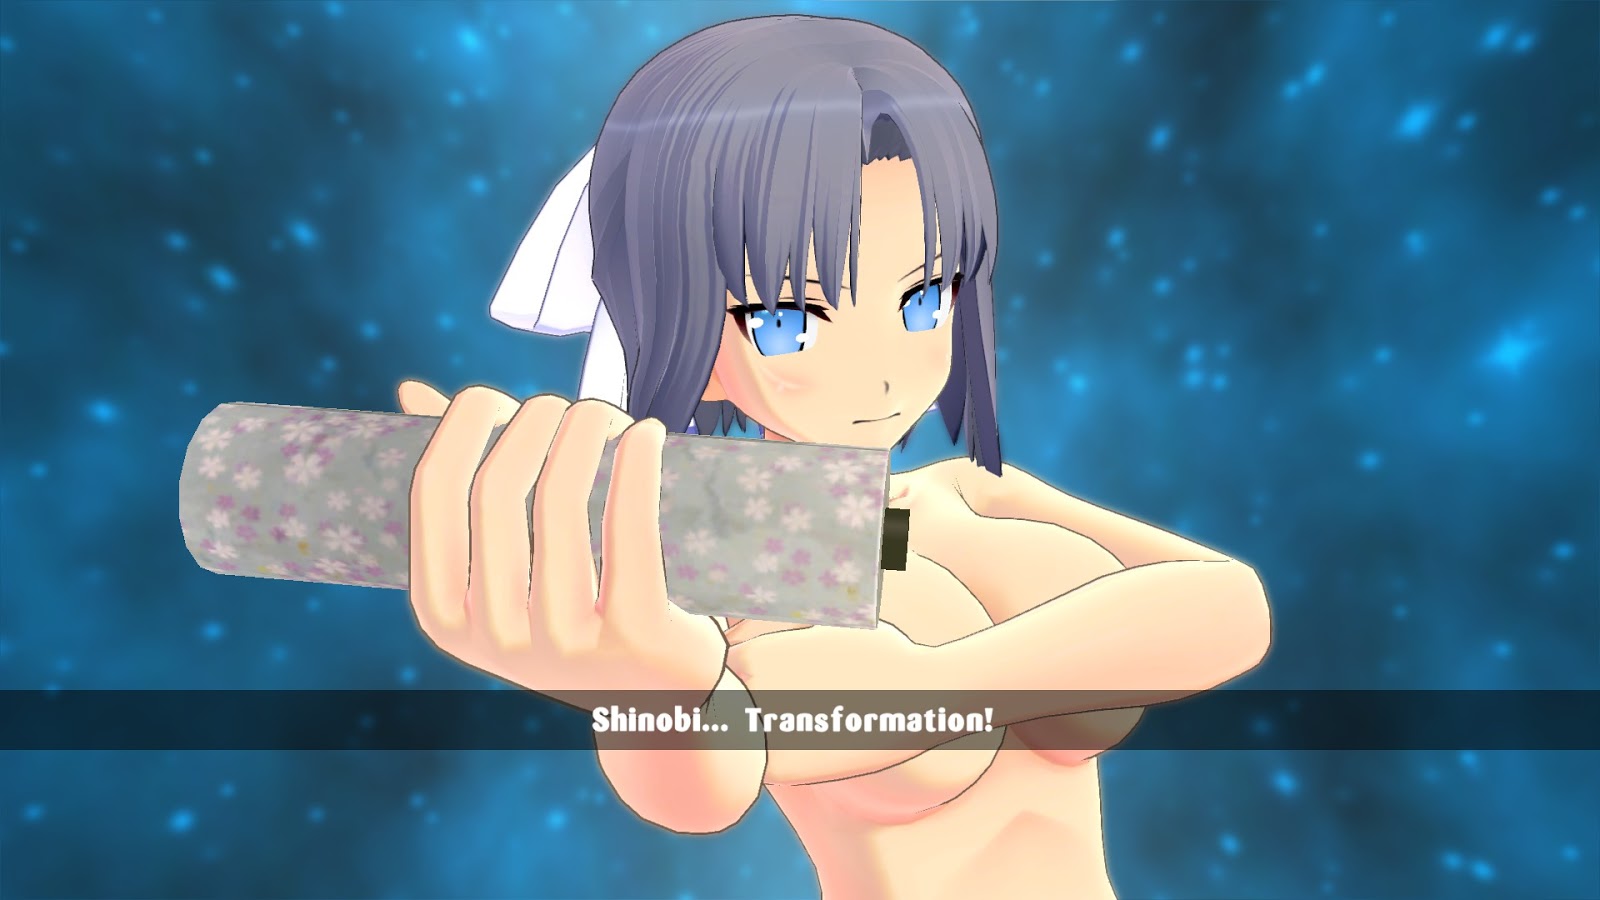 My Thoughts on Senran Kagura - How I feel about the characters